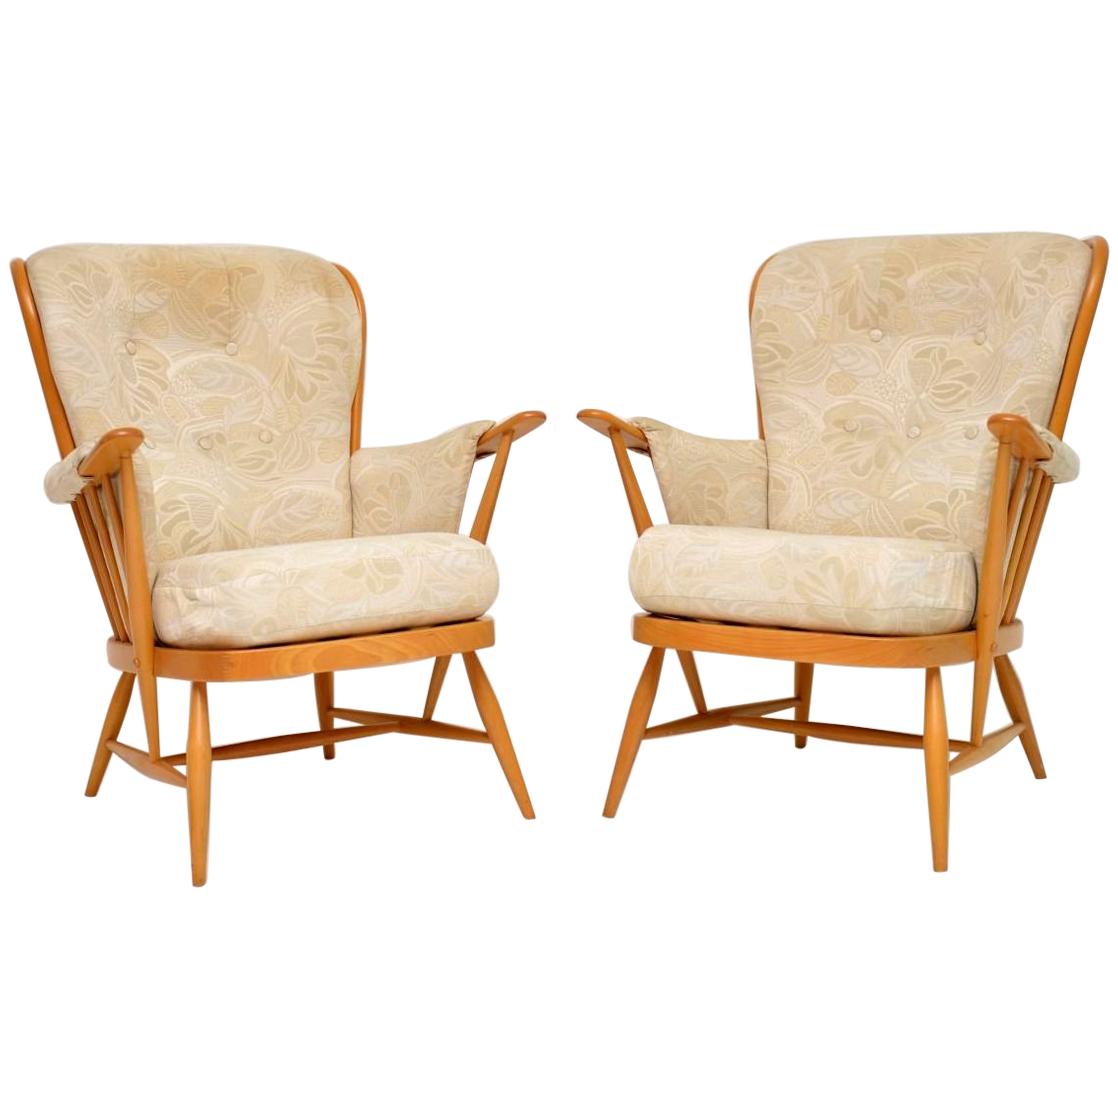 1970s Pair of Vintage Ercol Armchairs